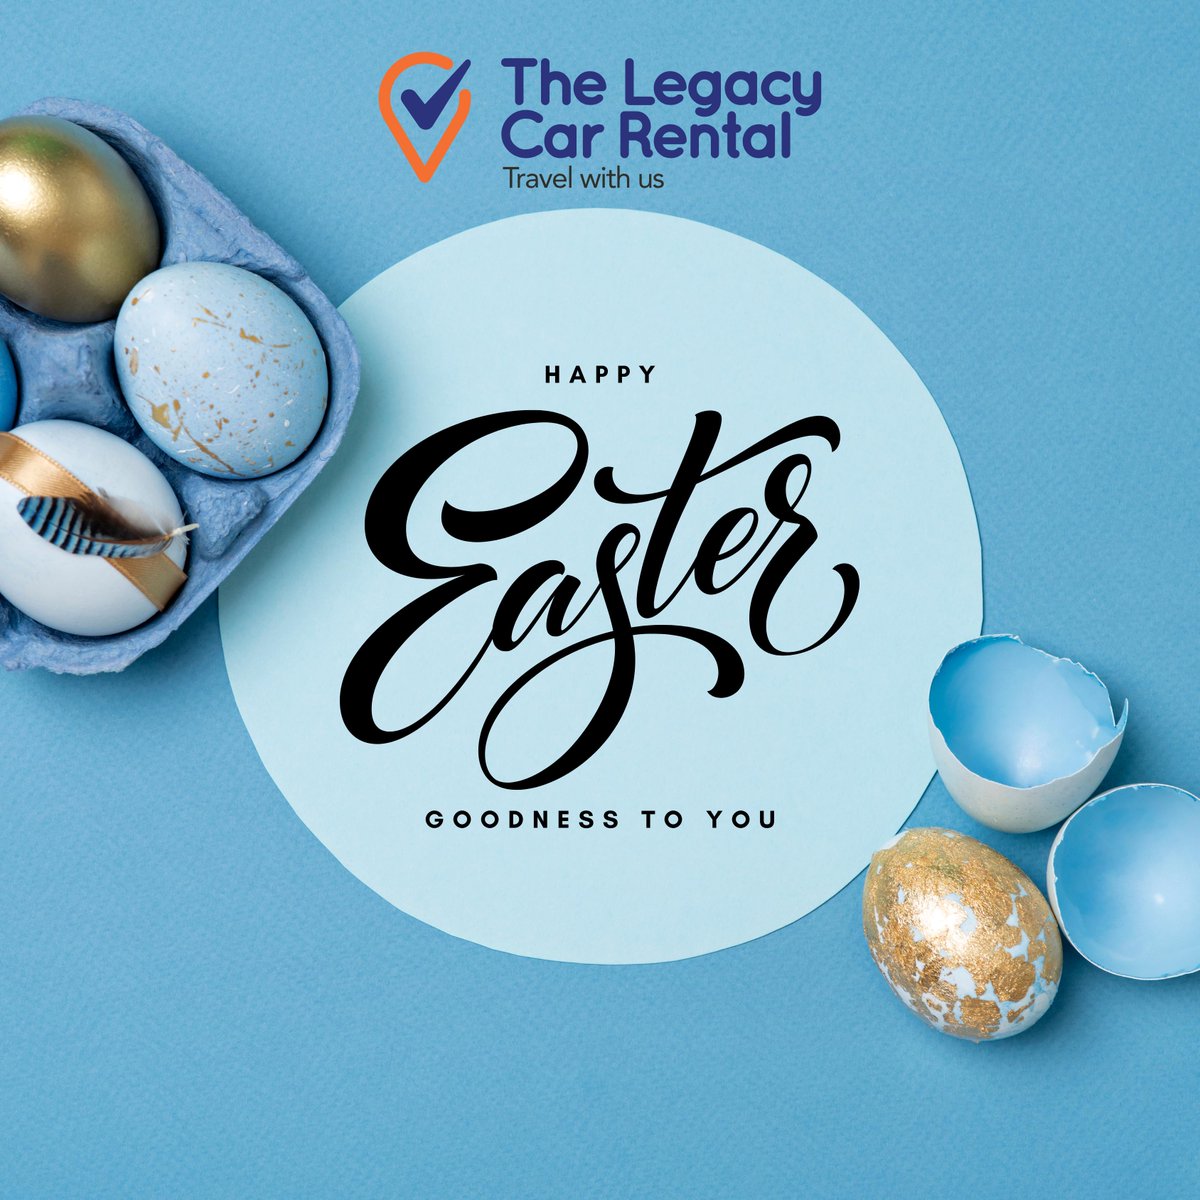 Have a blessed holiday filled with happiness, love, and faith. We hope to see you all again soon! #happyeastereveryone #Easter #carrental #carhire #travelwithus